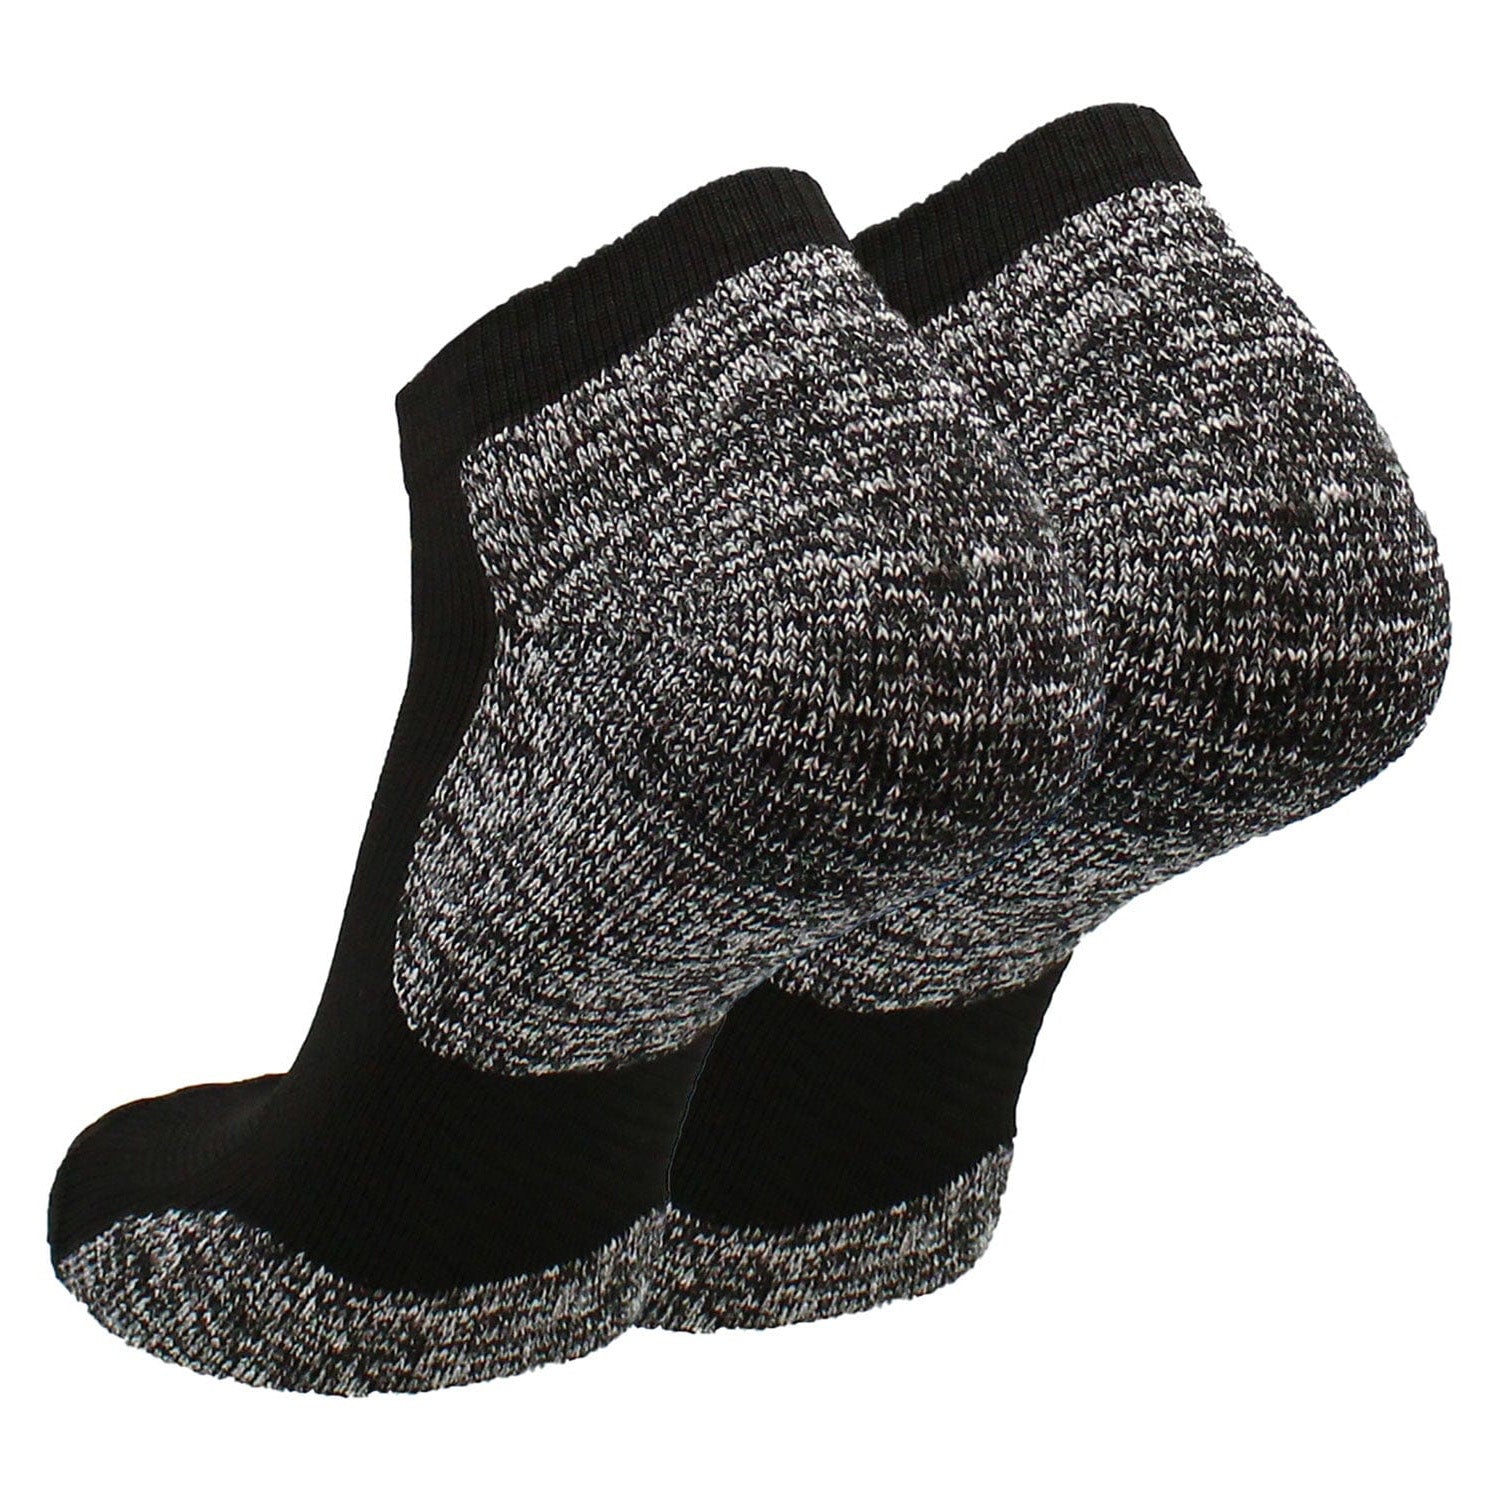 padded black and gray ankle socks